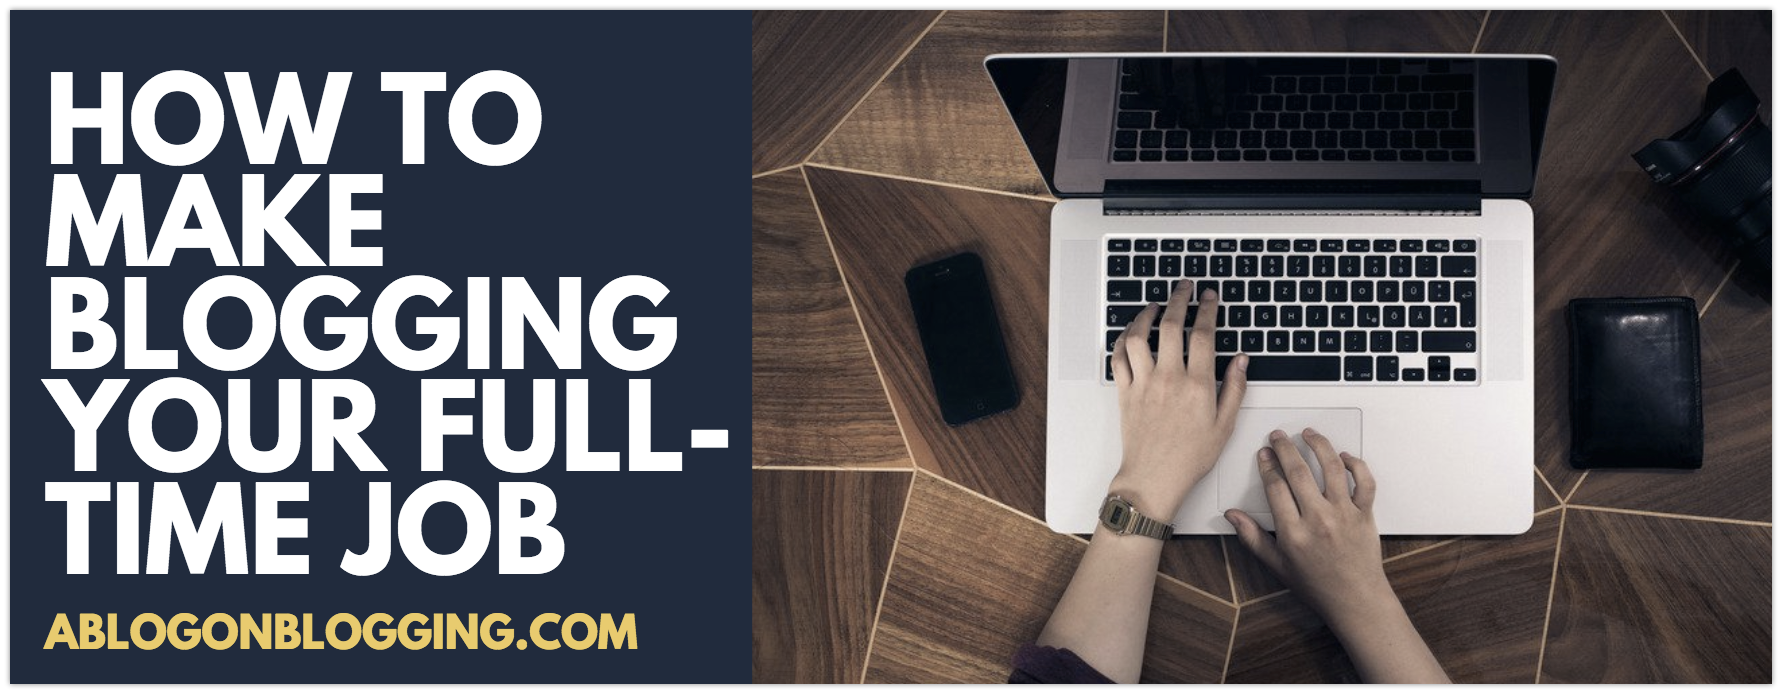 how to make blogging your full time job